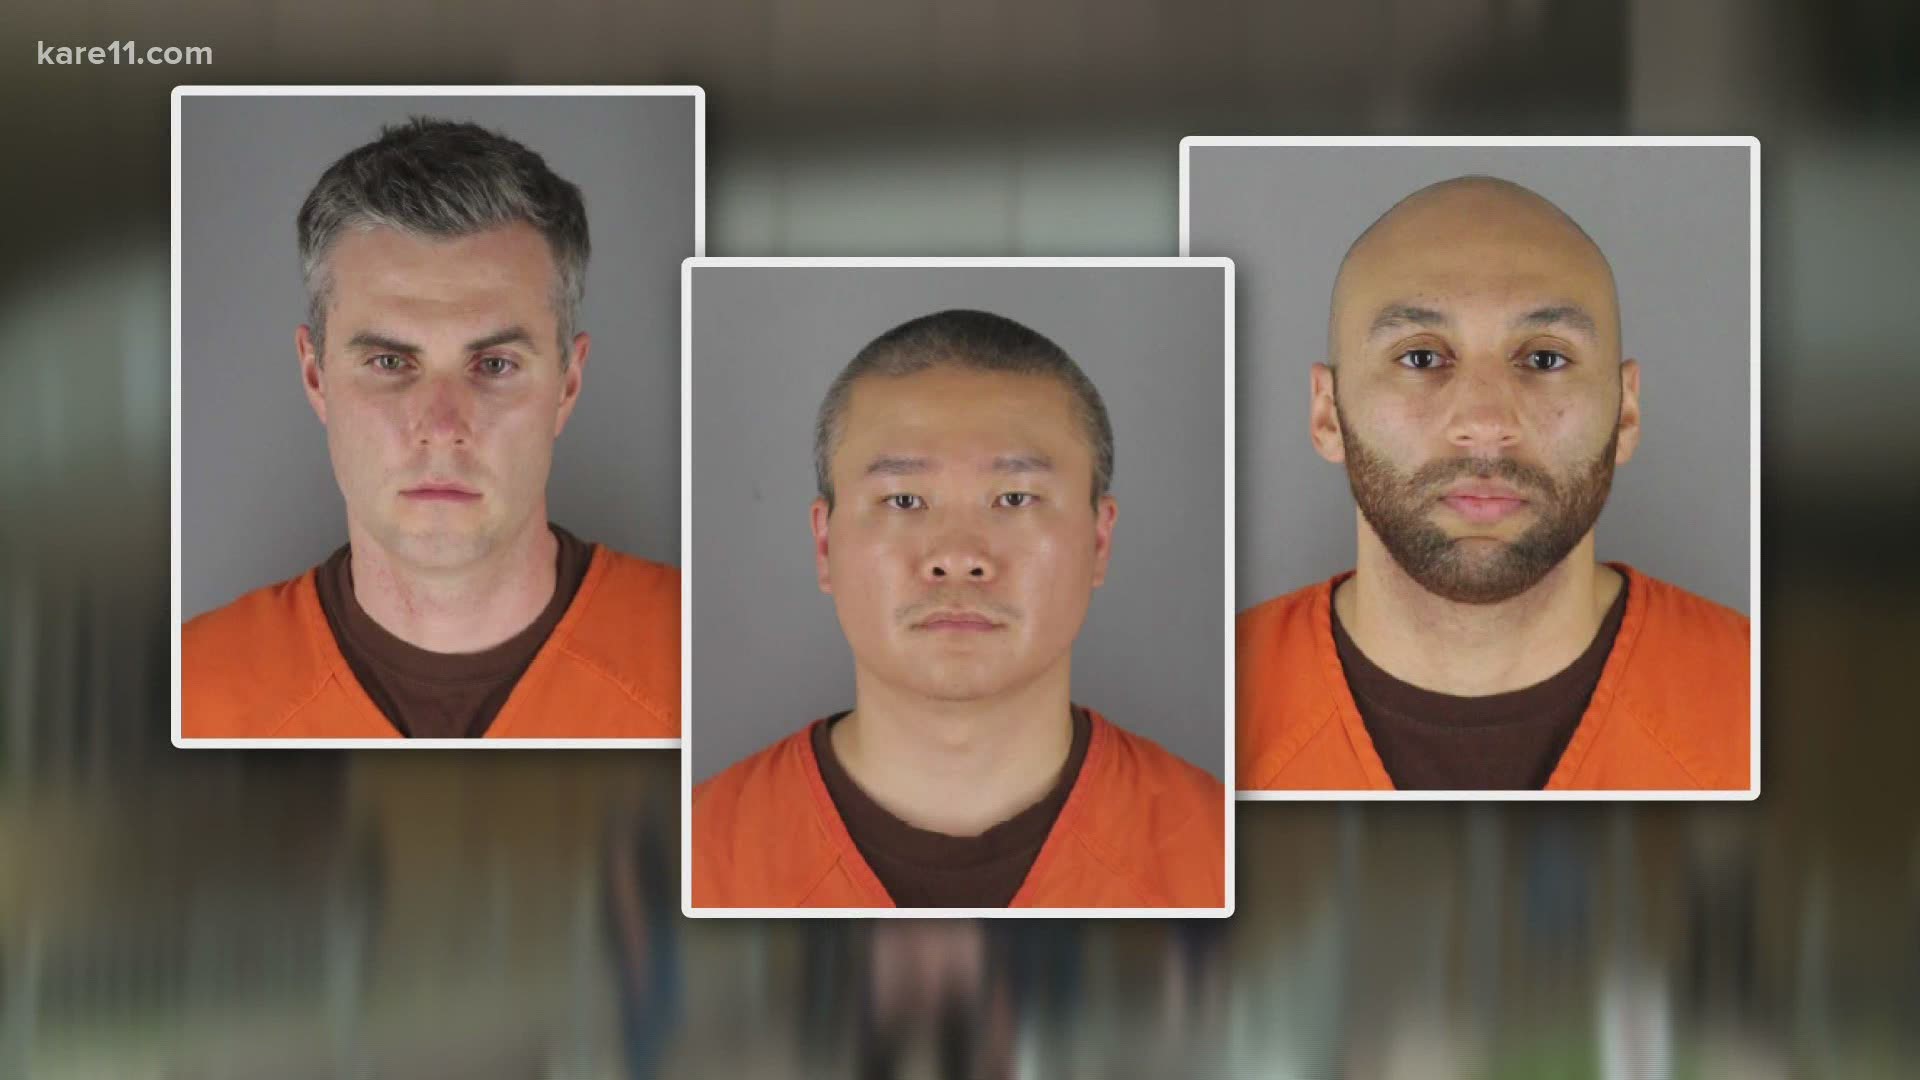 Tou Thao, J Alexander Kueng and Thomas Lane are all charged with aiding and abetting murder and manslaughter, for failing to act as Floyd struggled to breathe.